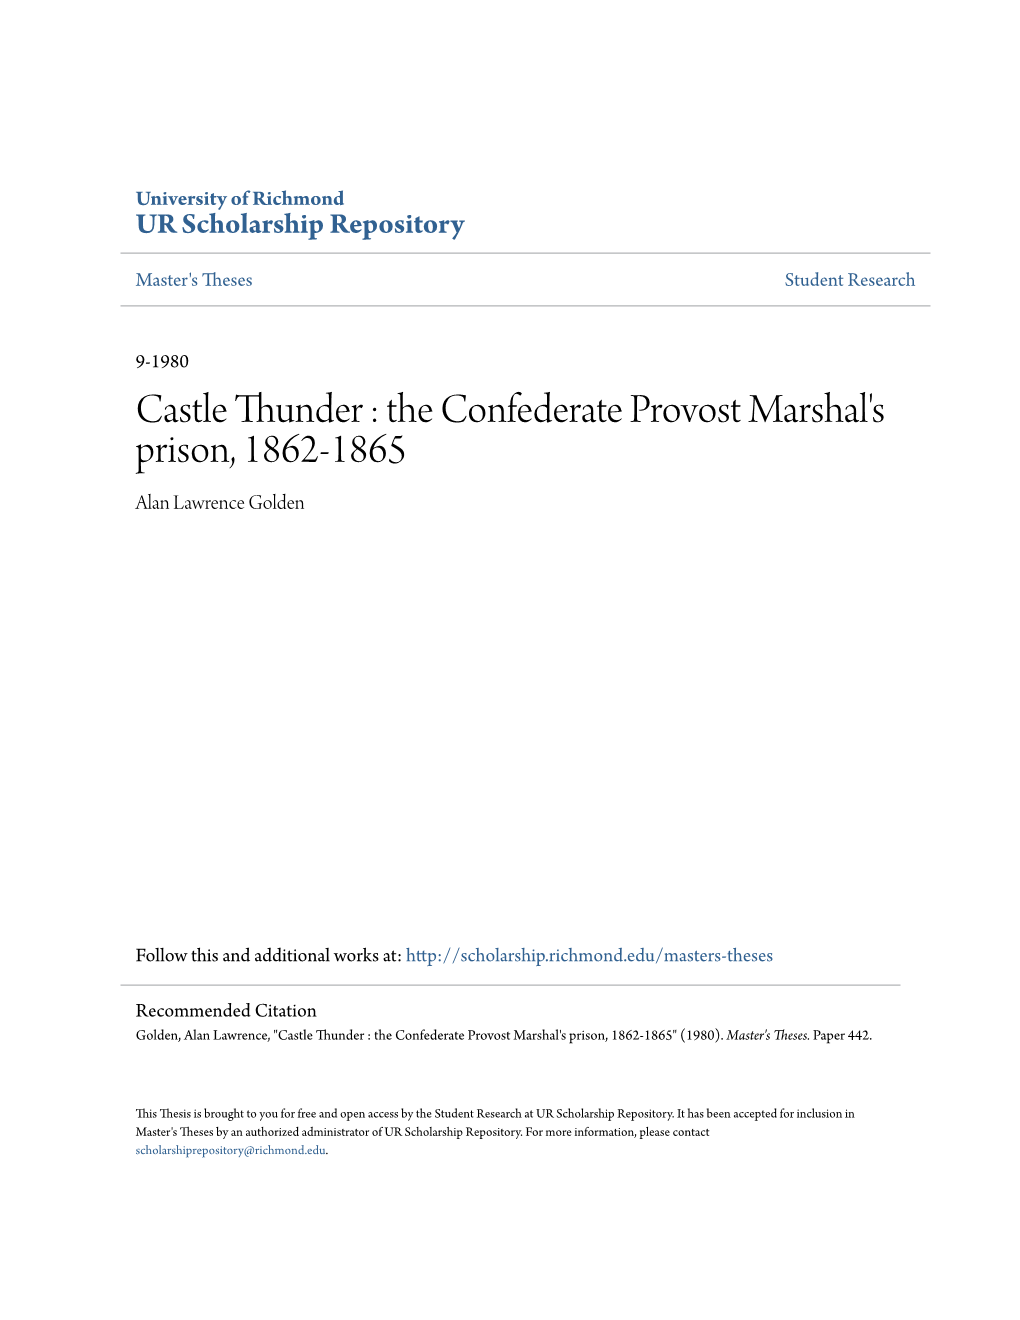 Castle Thunder : the Confederate Provost Marshal's Prison, 1862-1865 Alan Lawrence Golden